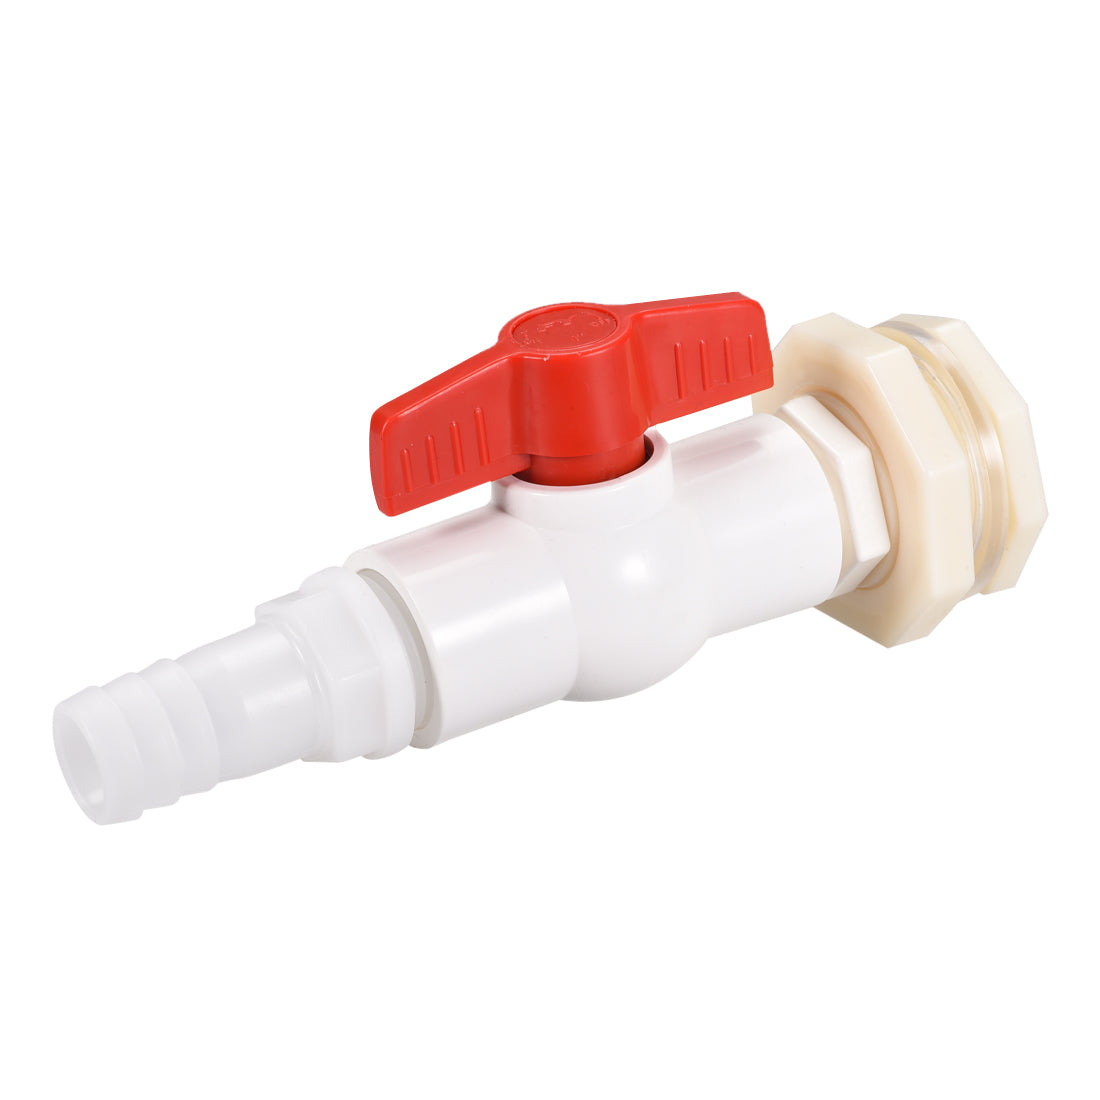 uxcell Uxcell ABS Ball Valve Pagoda Connector Spigot Kit, with Bulkhead Fitting Adapter, for Water Tank